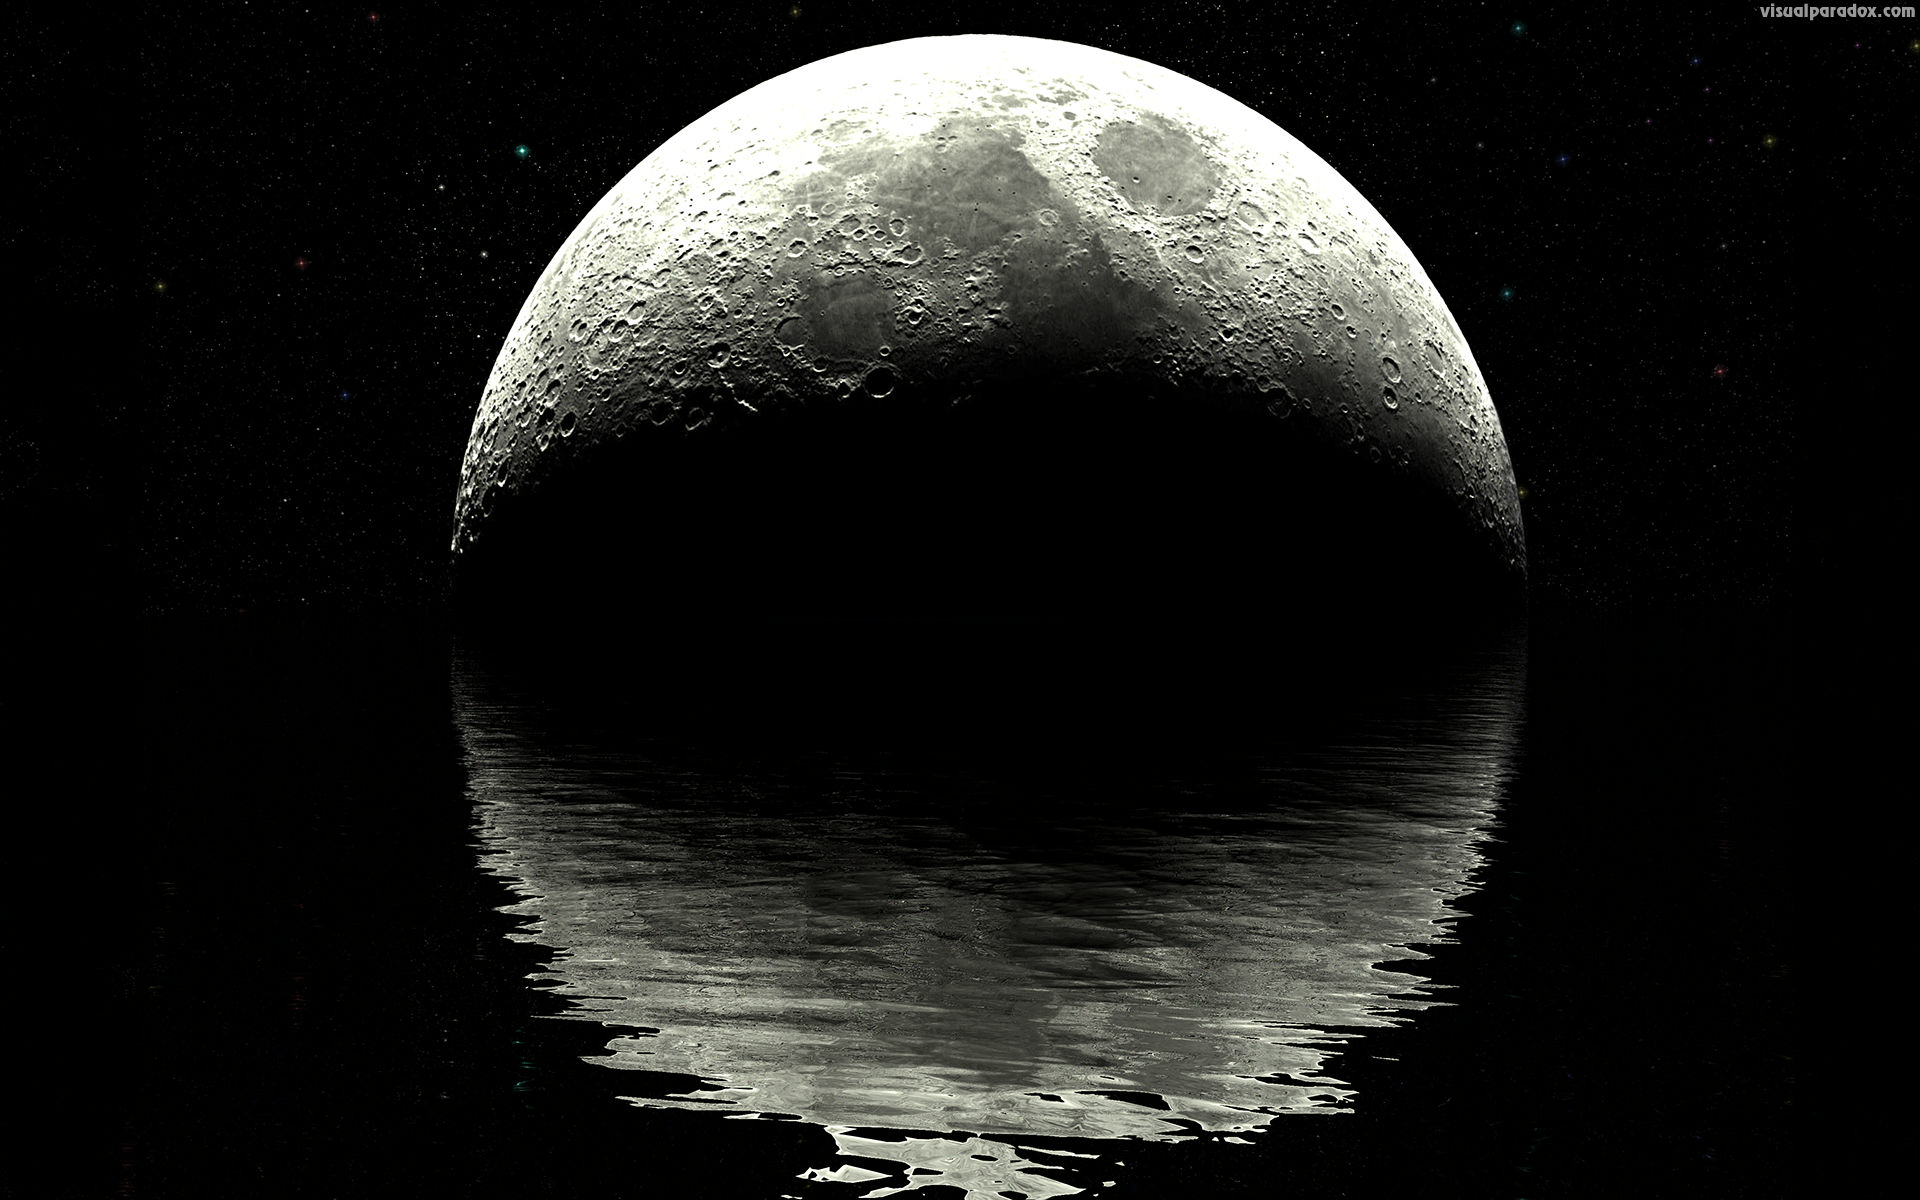 moon, lunar, ocean, water, waves, ripples, night, stars, planet, reflection, planets, black, white, sea, craters, 3d, wallpaper